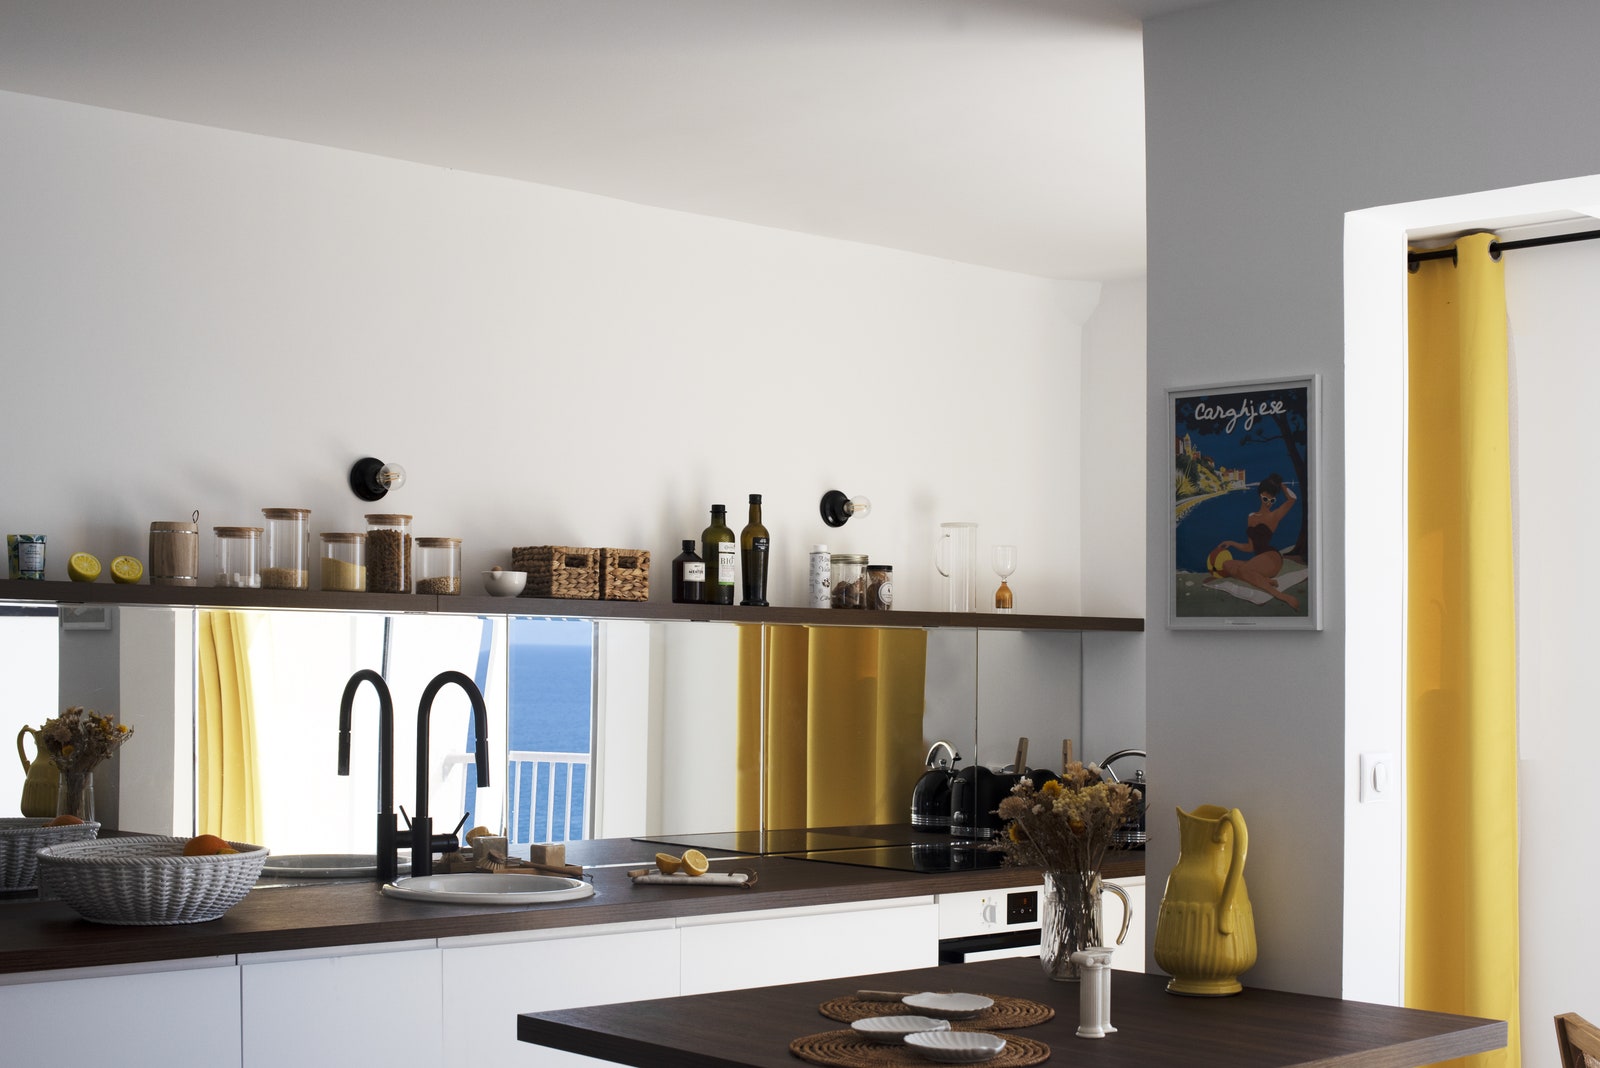 White base units covered in a mirrored credenza occupies the entire kitchen wall.  Worktop and shelf...